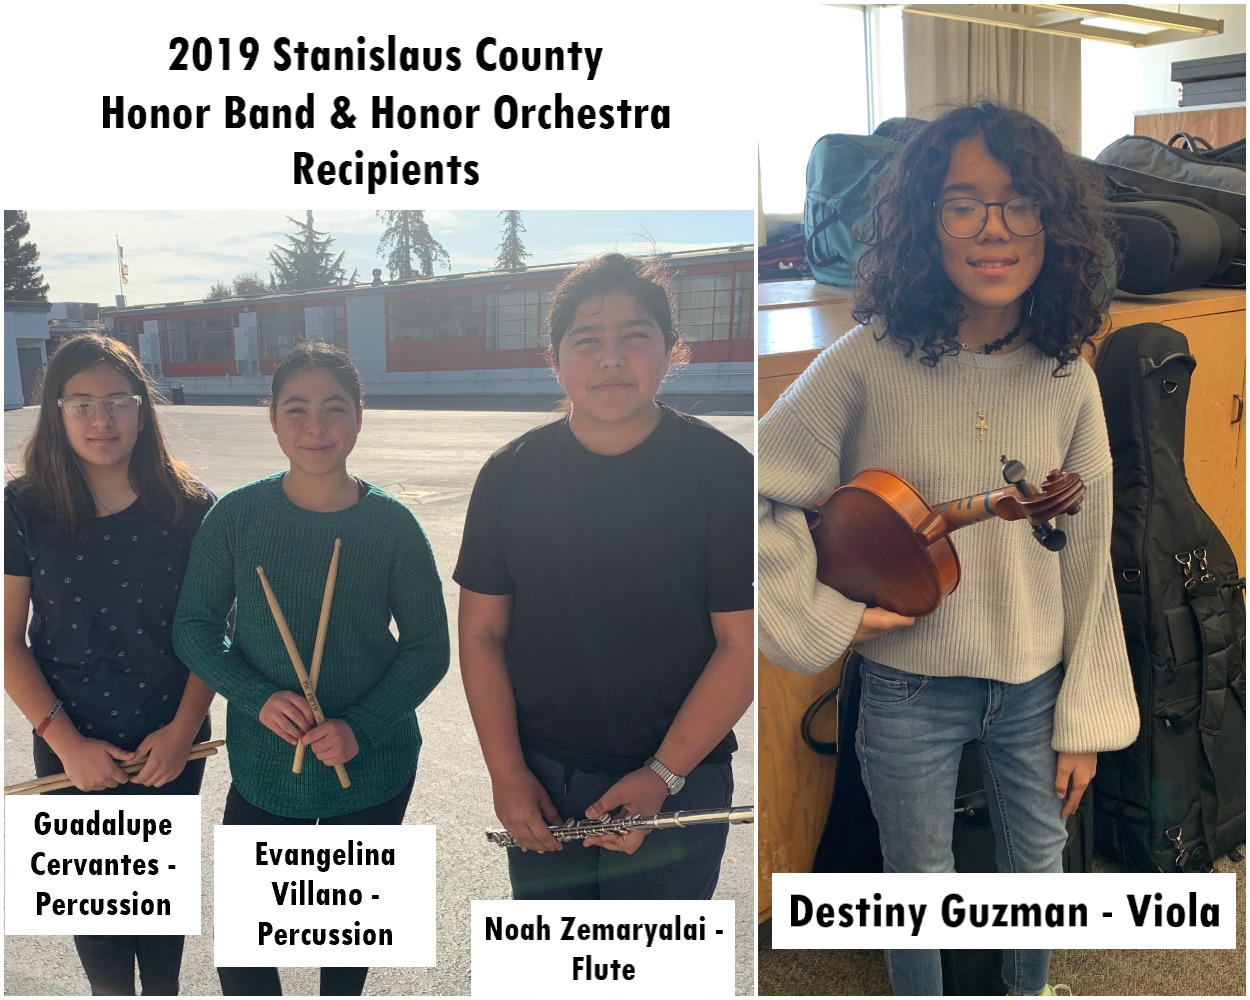 2019 Stanislaus County Honor Band & Orchestra Recipients